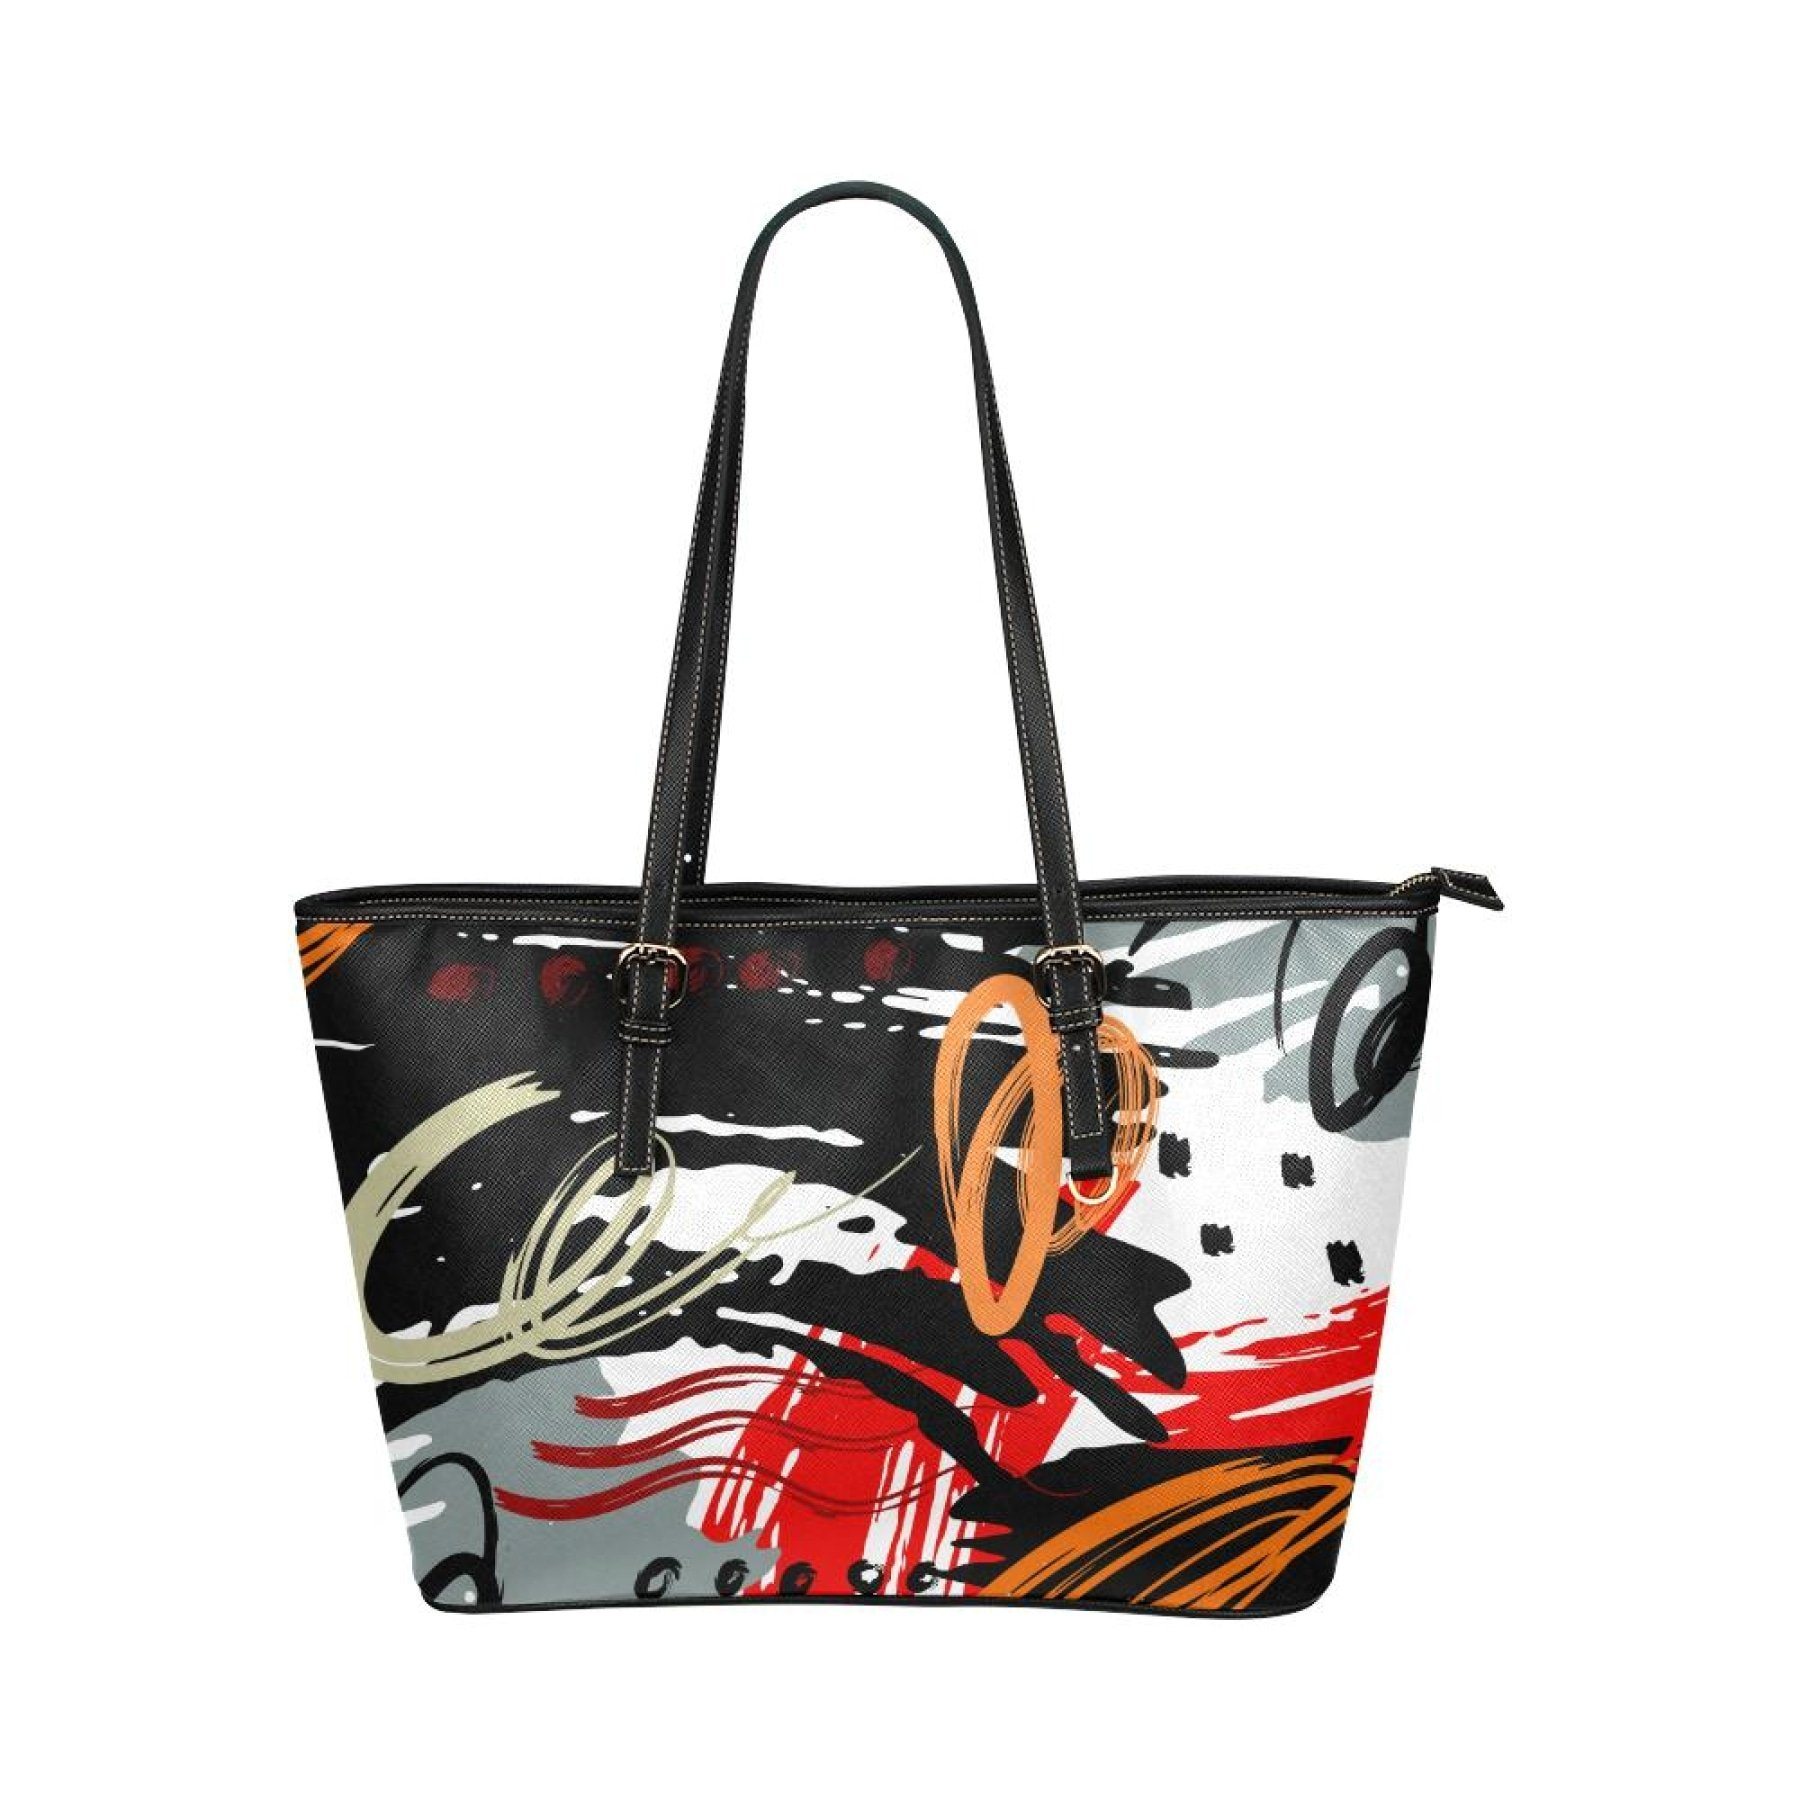 Black, Red, And Gray Abstract Style Leather Tote Bag 10